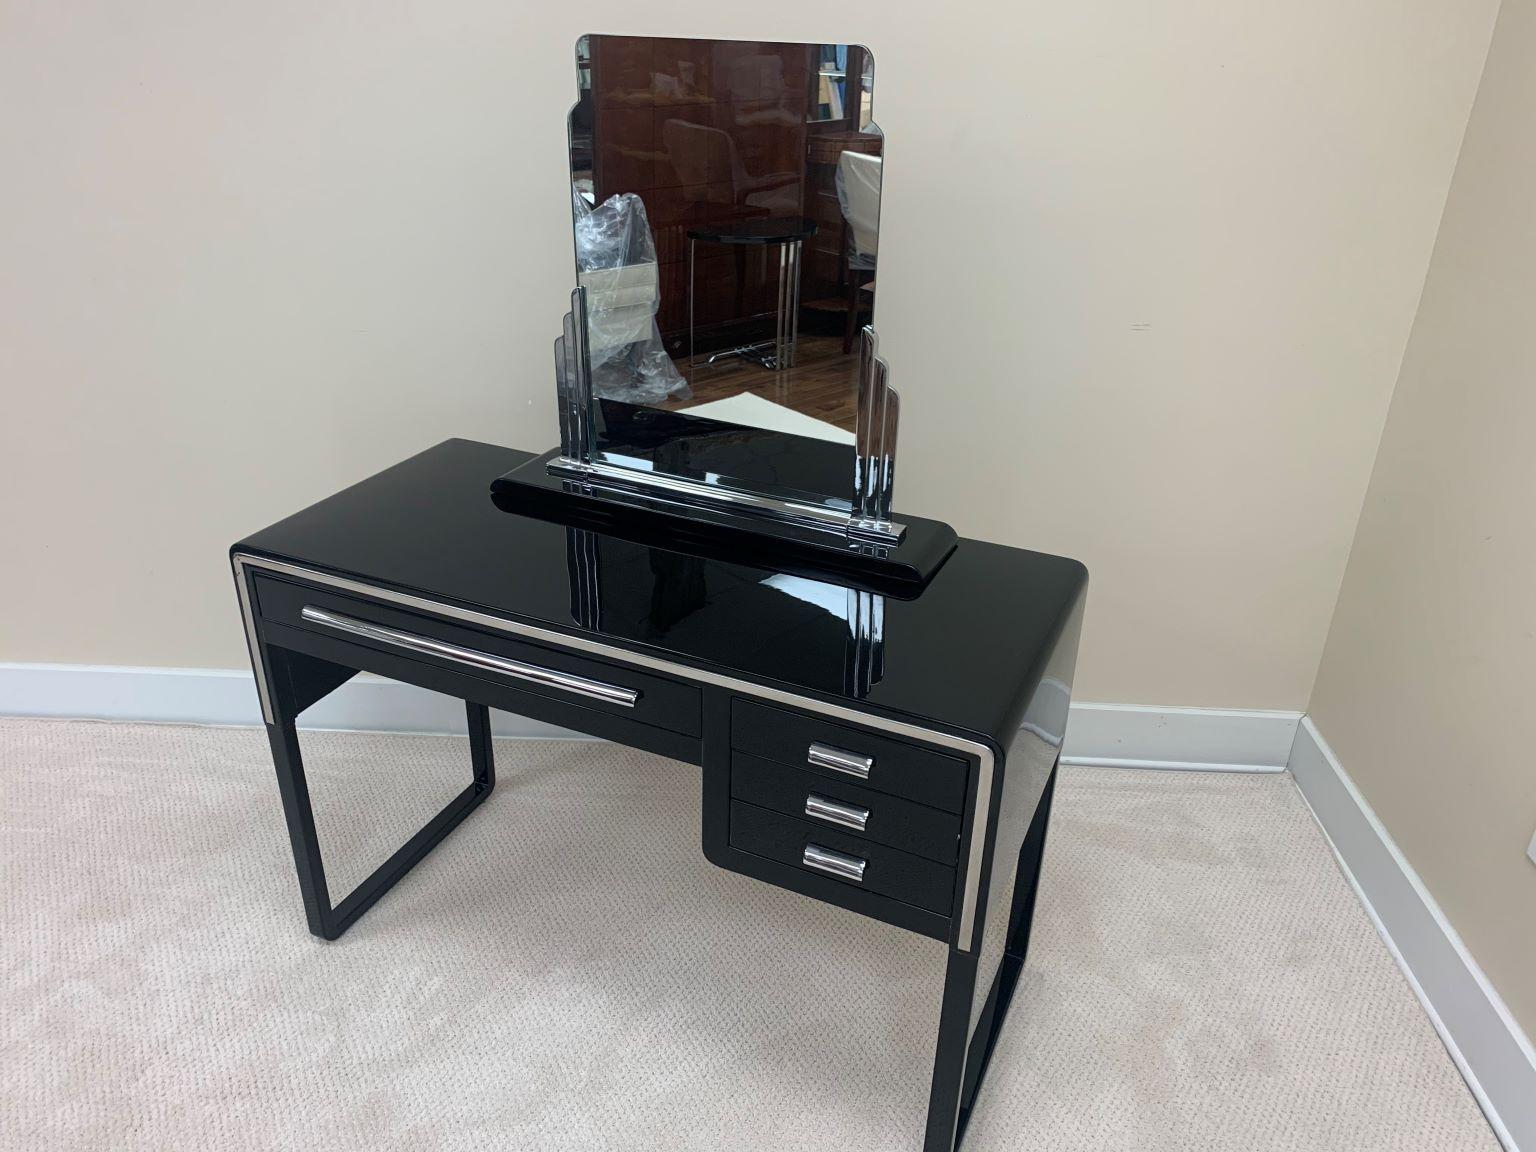 Very rare Art Deco Norman Bel Geddes desk or vanity and Skyscraper mirror by Simmons, circa 1930. Marked on bottom of the mirror and cabinet 5-33. The mirror design is based off the Chrysler building in NYC. It also was on display at Chicago’s